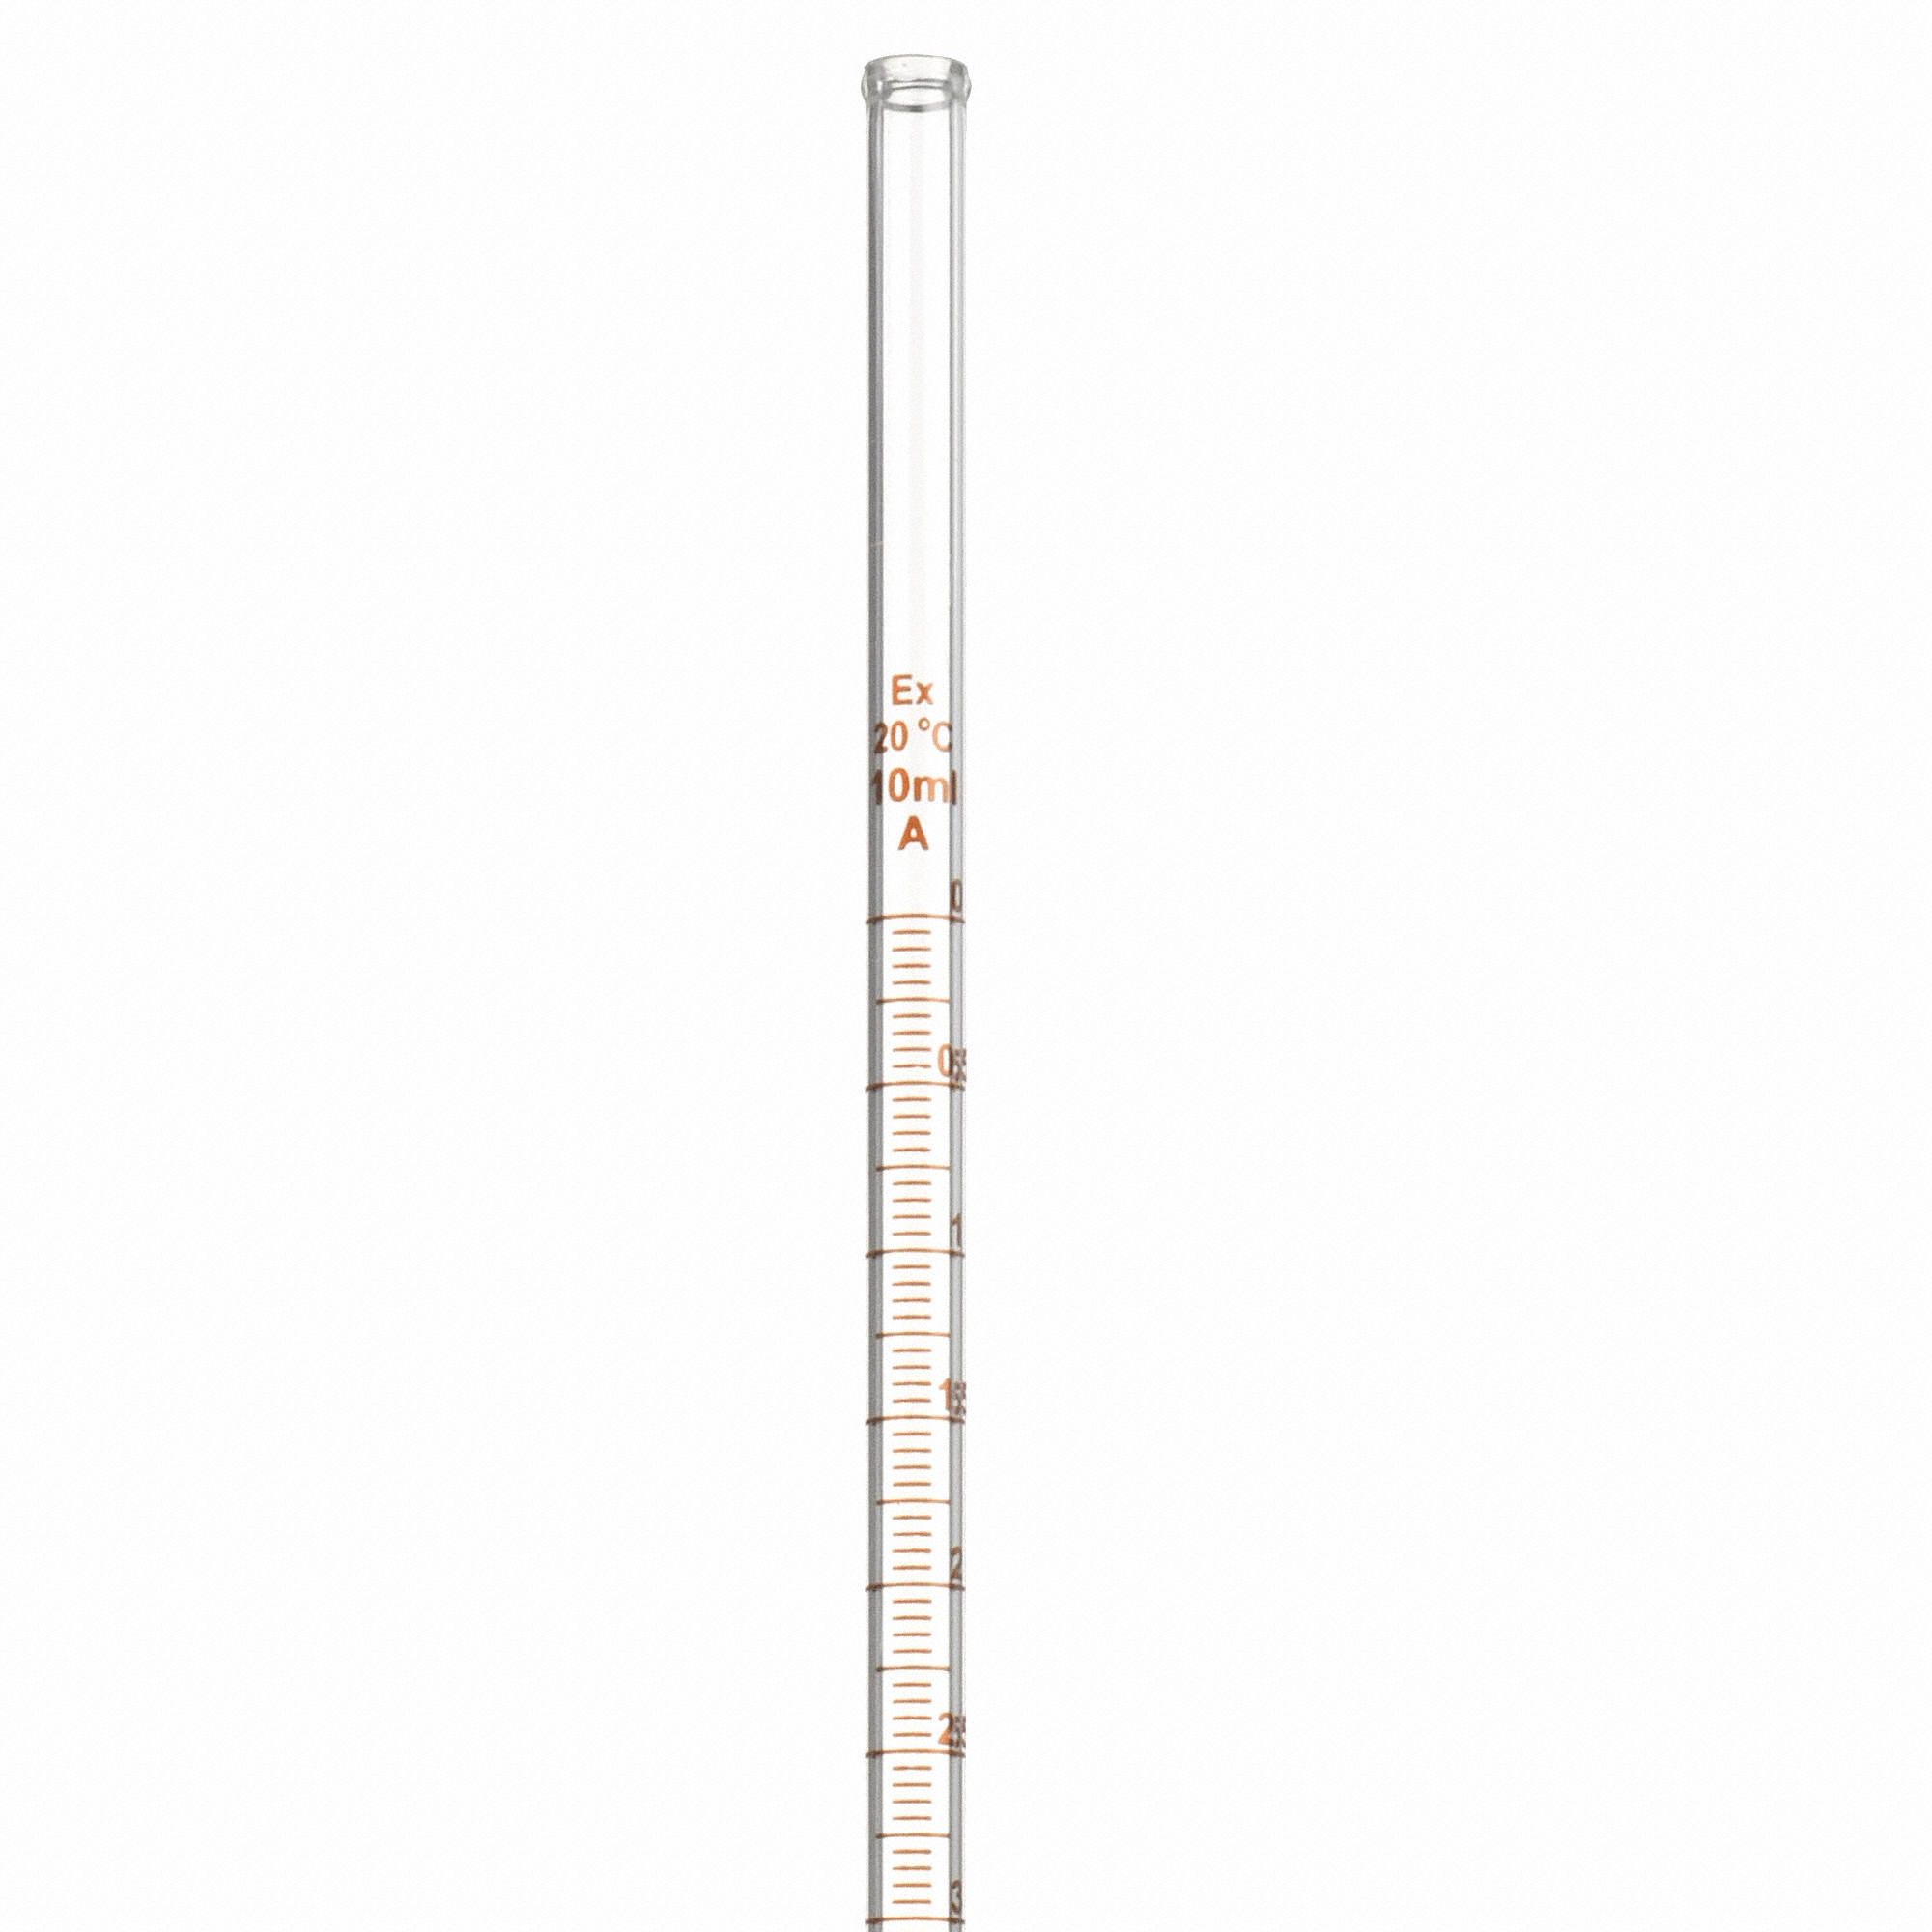 LAB SAFETY SUPPLY Burette, Straight Bore: Glass, 10 mL Capacity, 0 to ...